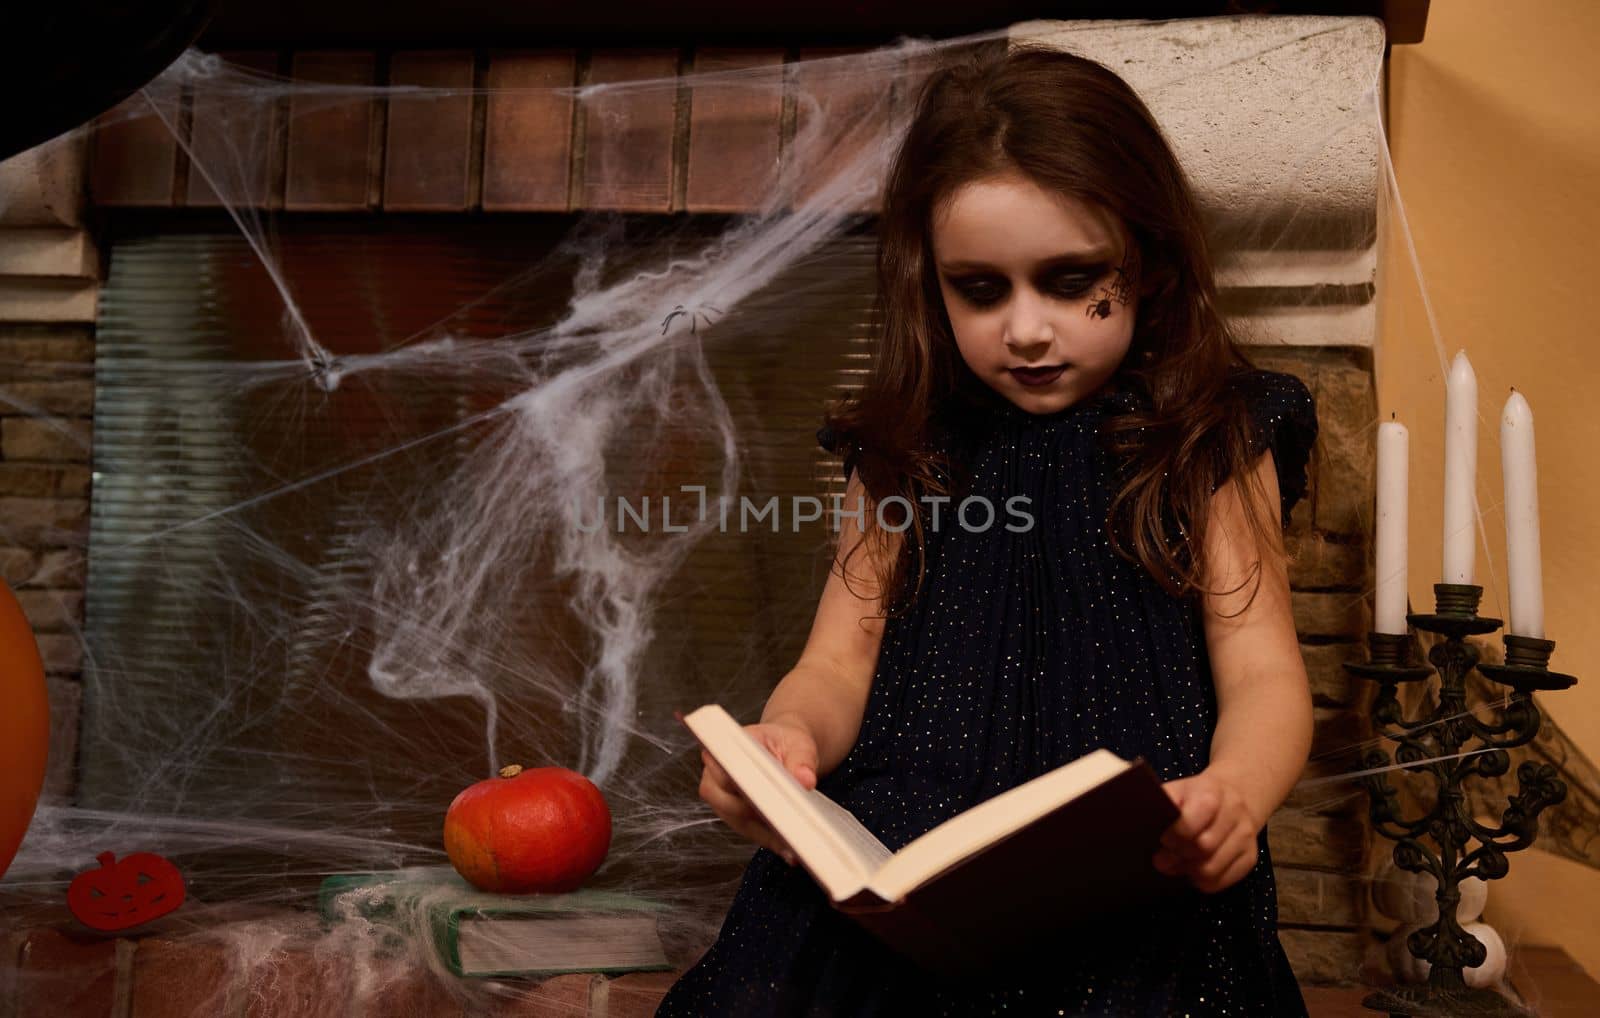 Adorable gothic stylish child girl with a book of spells, sitting by a cobweb-covered fireplace and candles on a candlestick holder, learning enchentery, sorcery while celebration the Halloween night